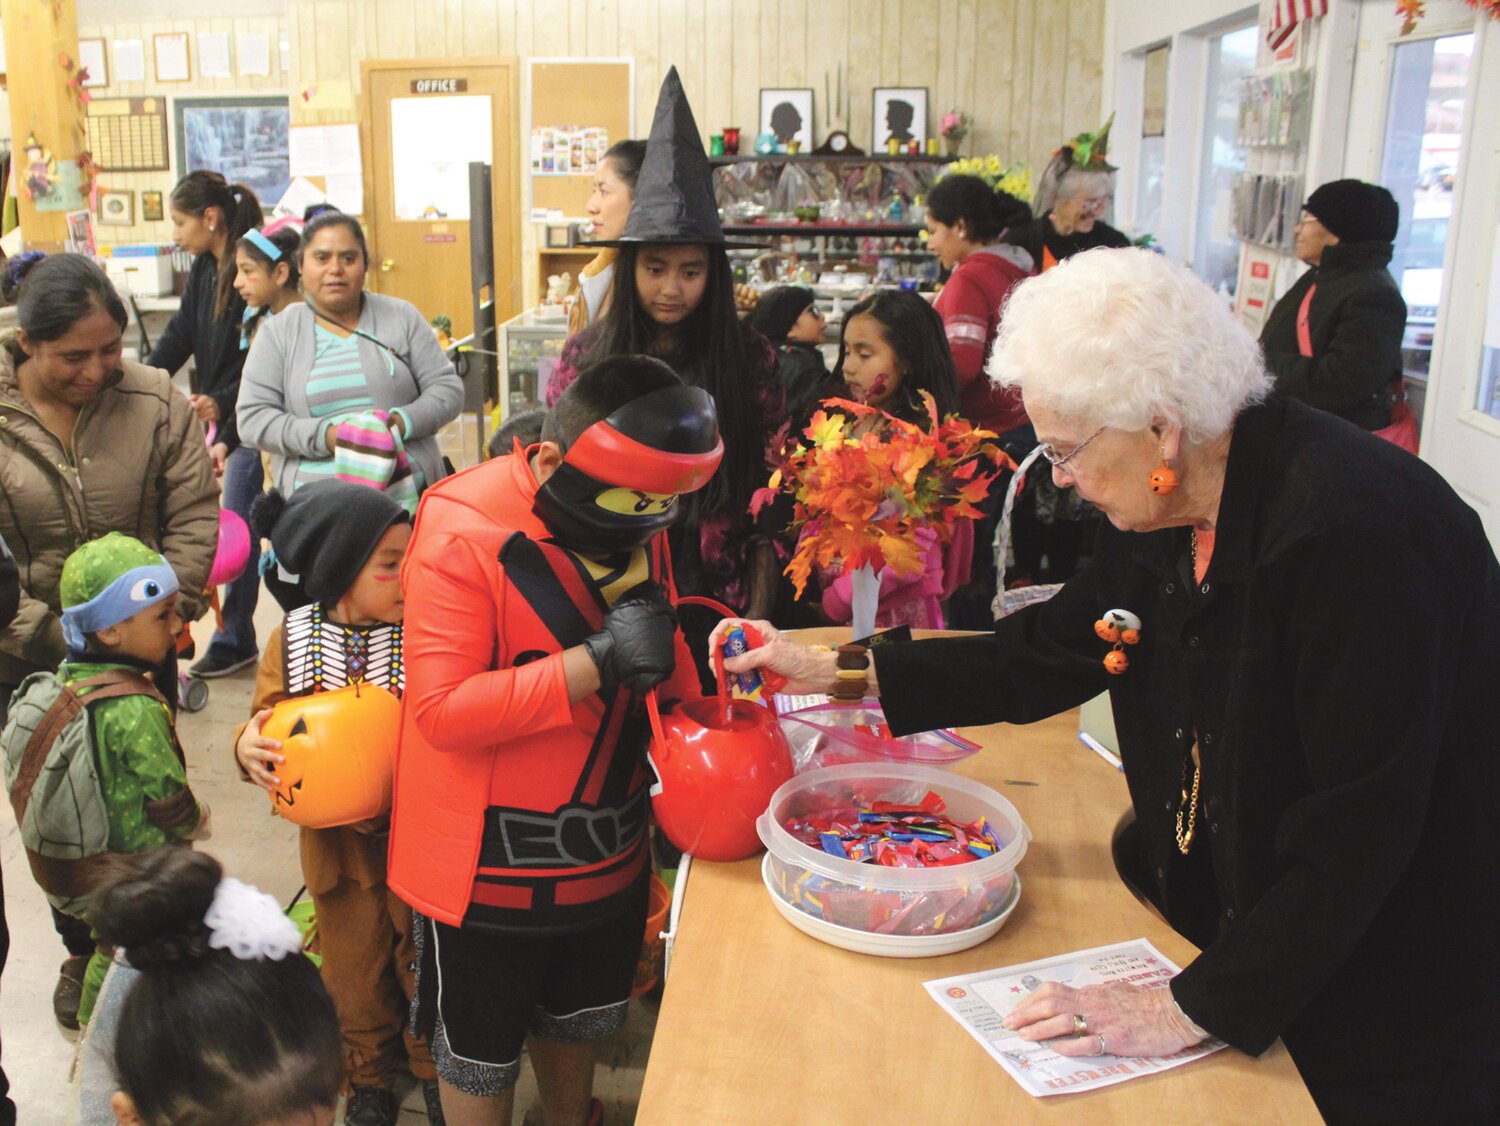 Paula Peckham, right, staffed the candy table and distributed treats to the scores of trick-or-treaters who stopped by the Senior Center on Halloween.